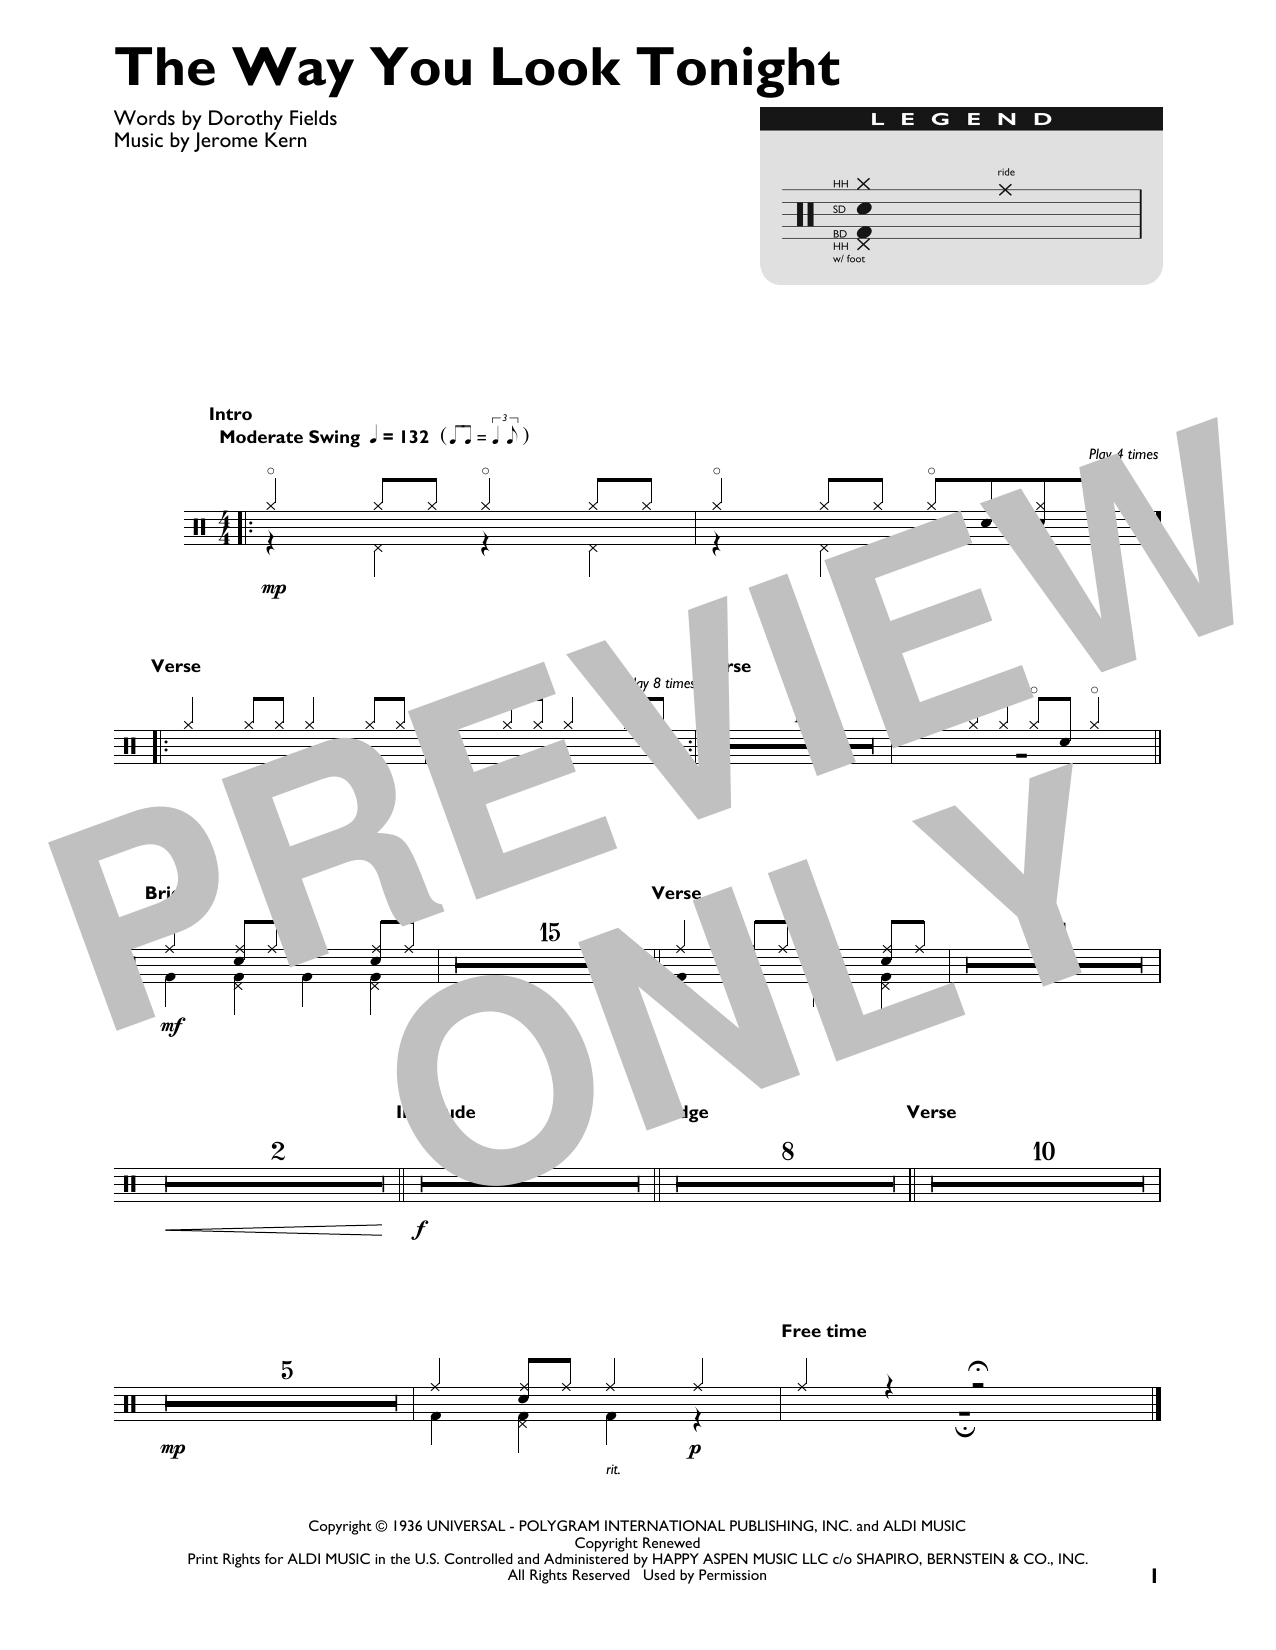 Download Frank Sinatra The Way You Look Tonight Sheet Music